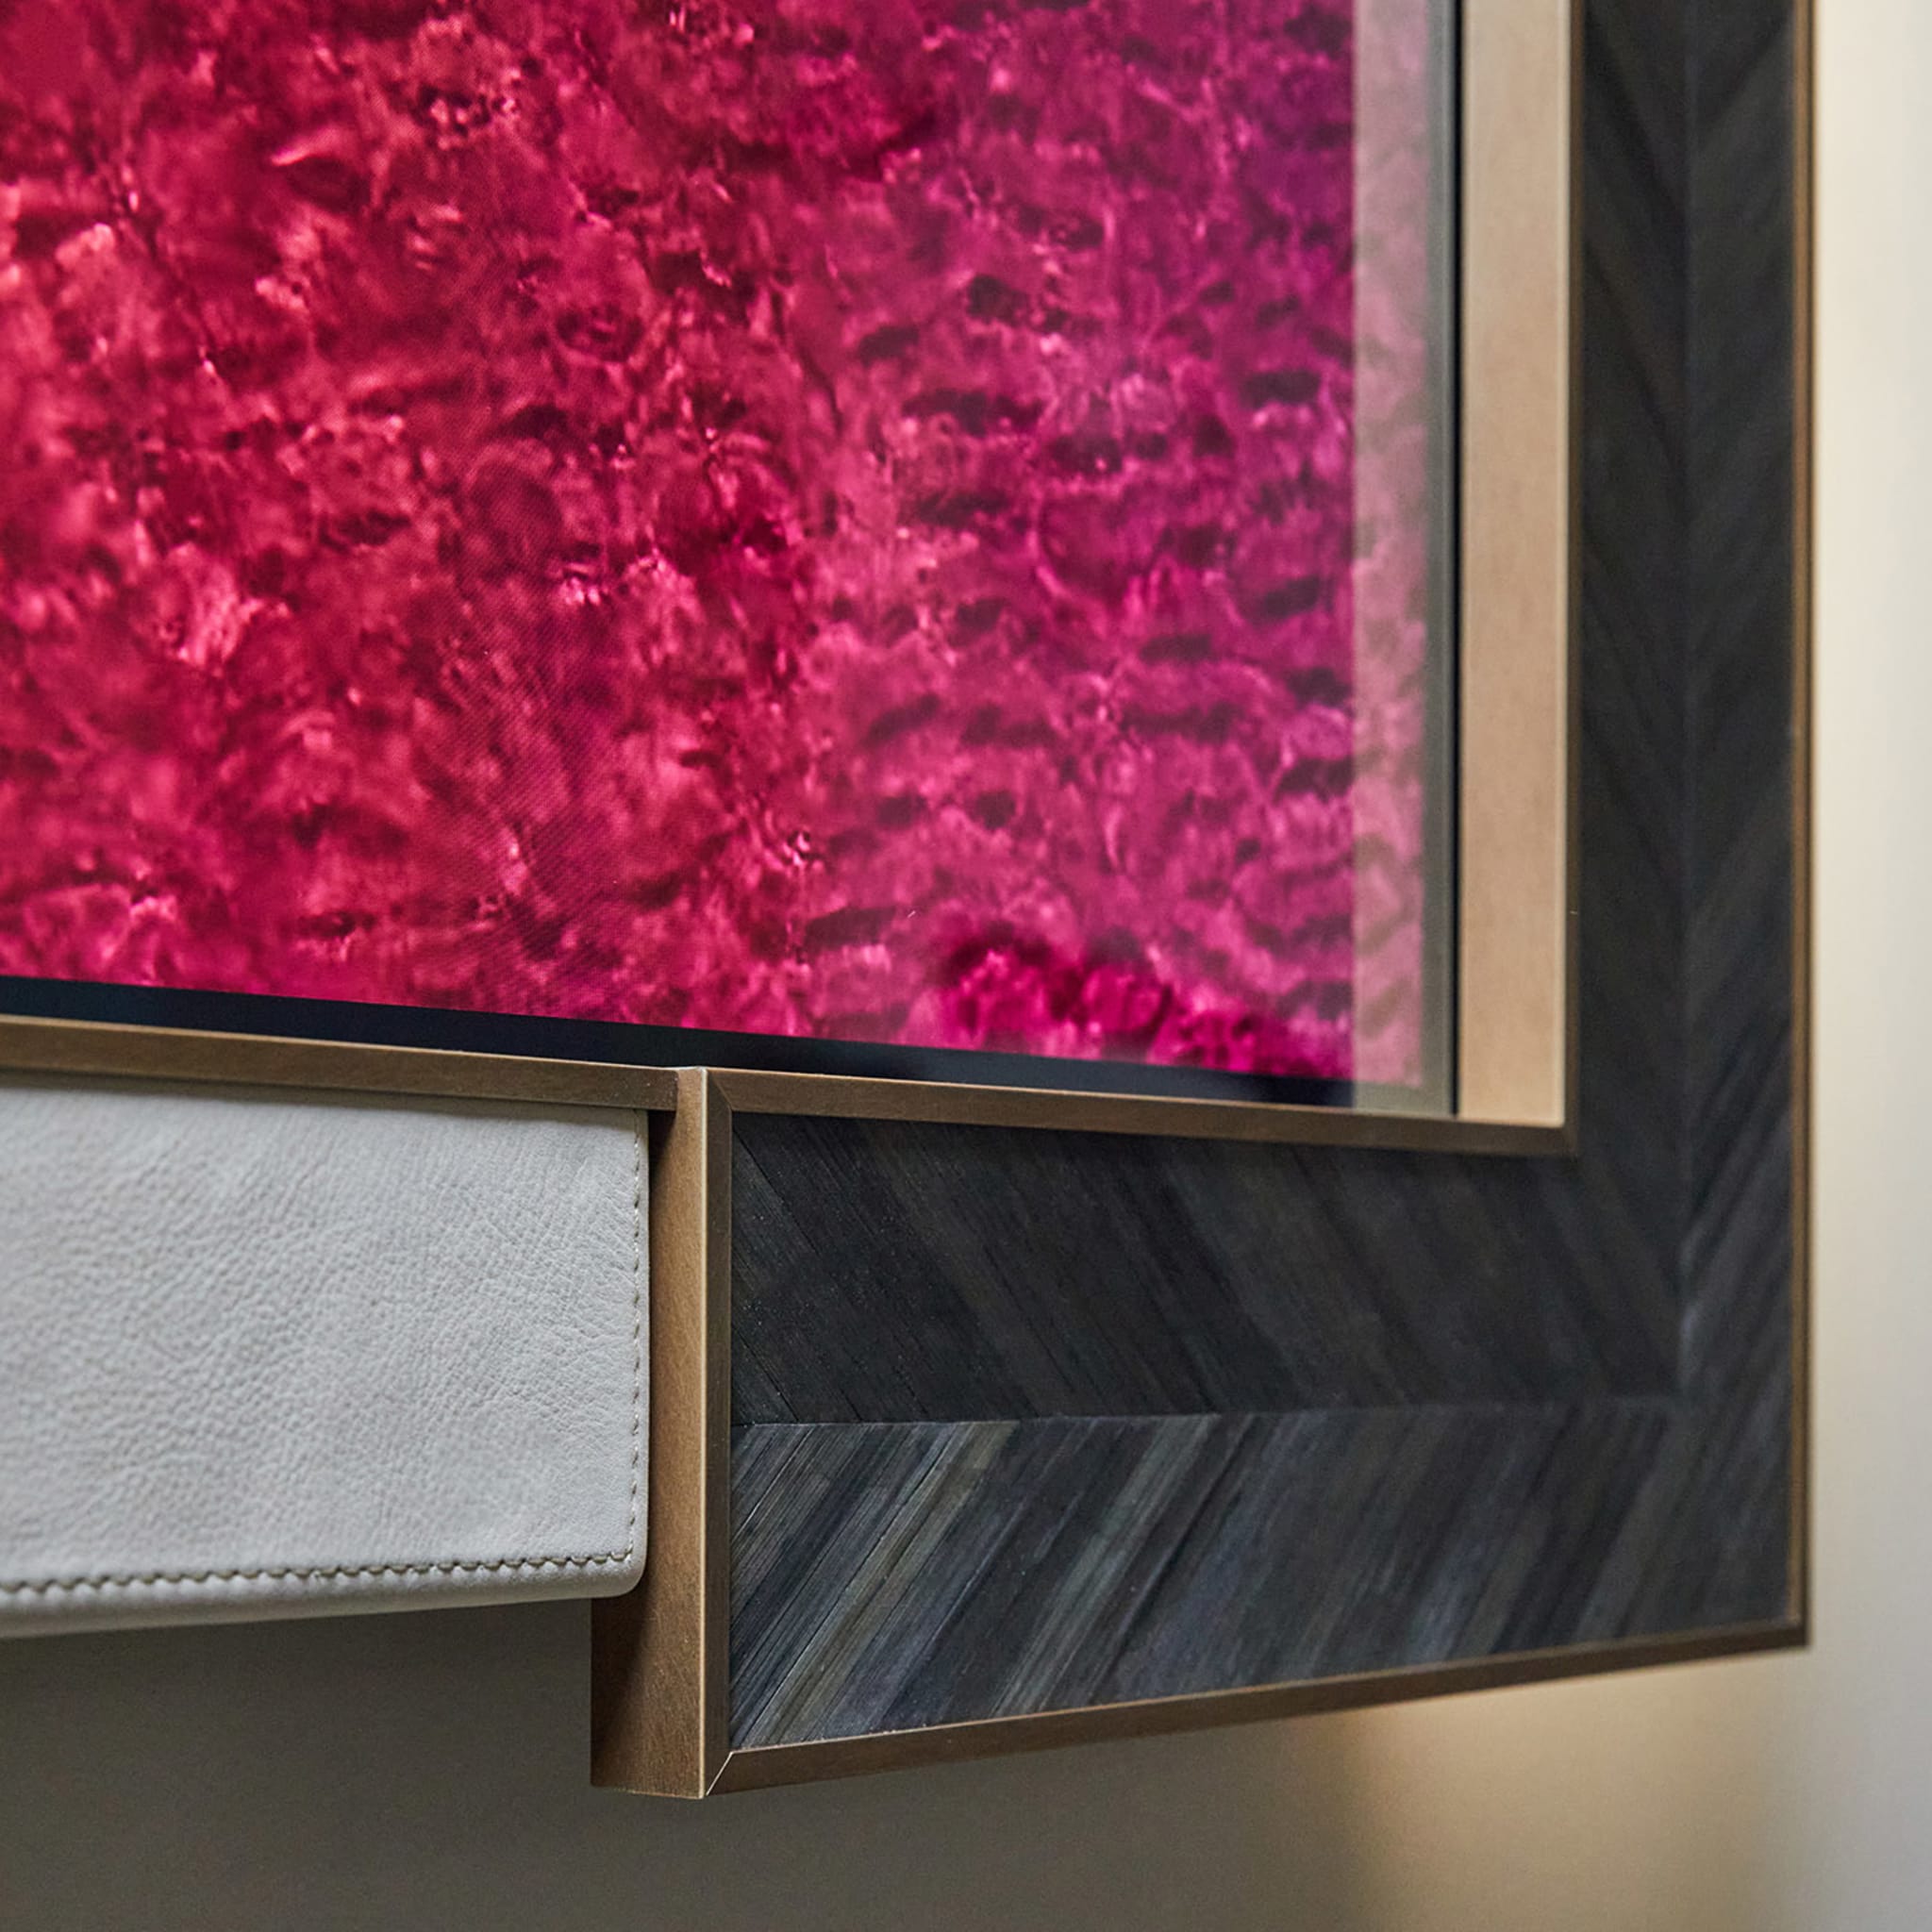 Grisaglia Wall Mirror with Integrated 43" TV by Alfredo Colombo - Alternative view 3